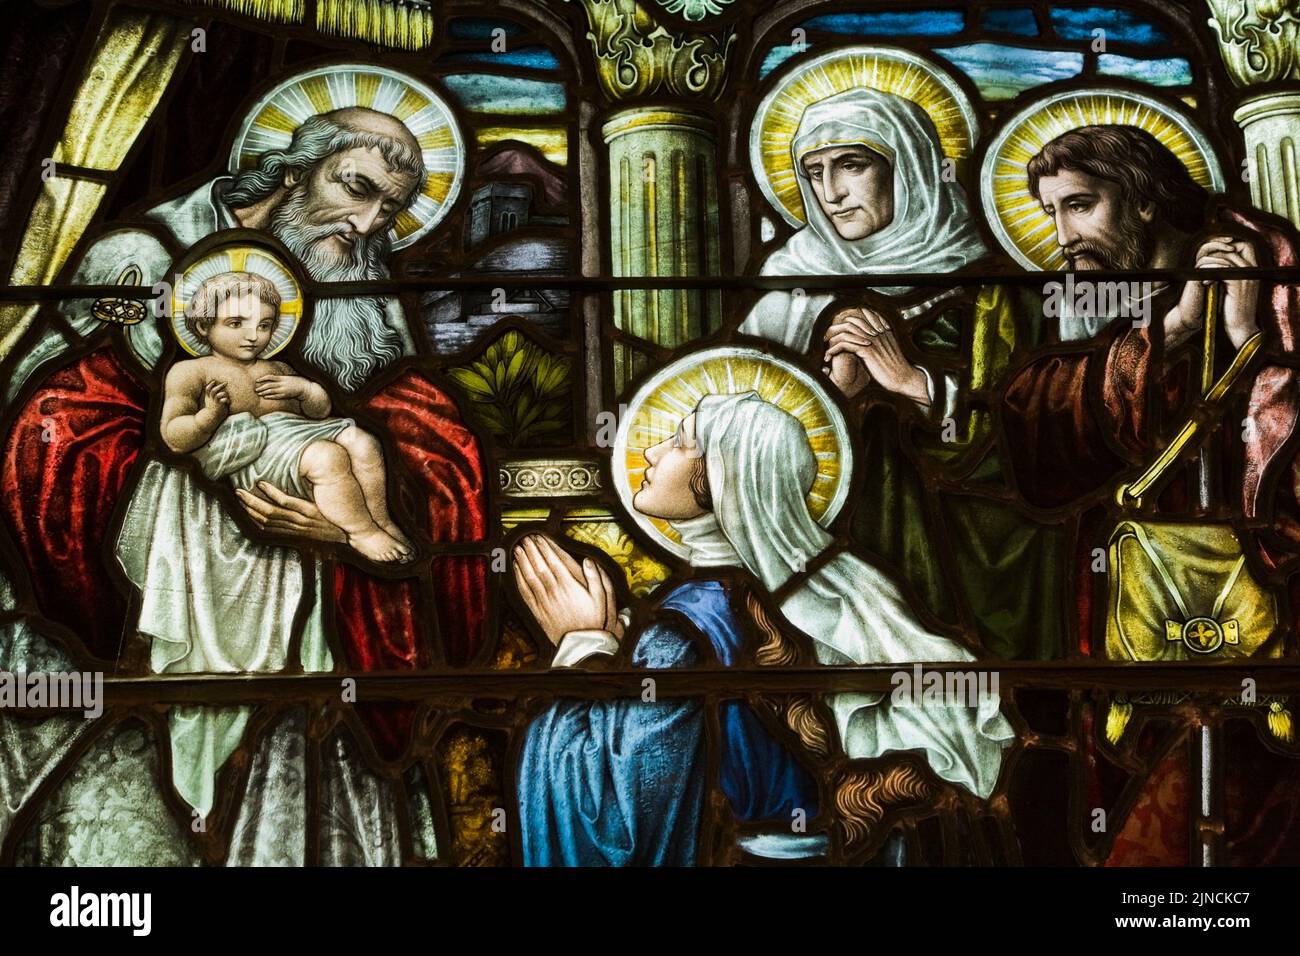 Colourful stained glass window with religious scene, Cathedral of the Holy Trinity, Quebec City, Quebec, Canada. Stock Photo